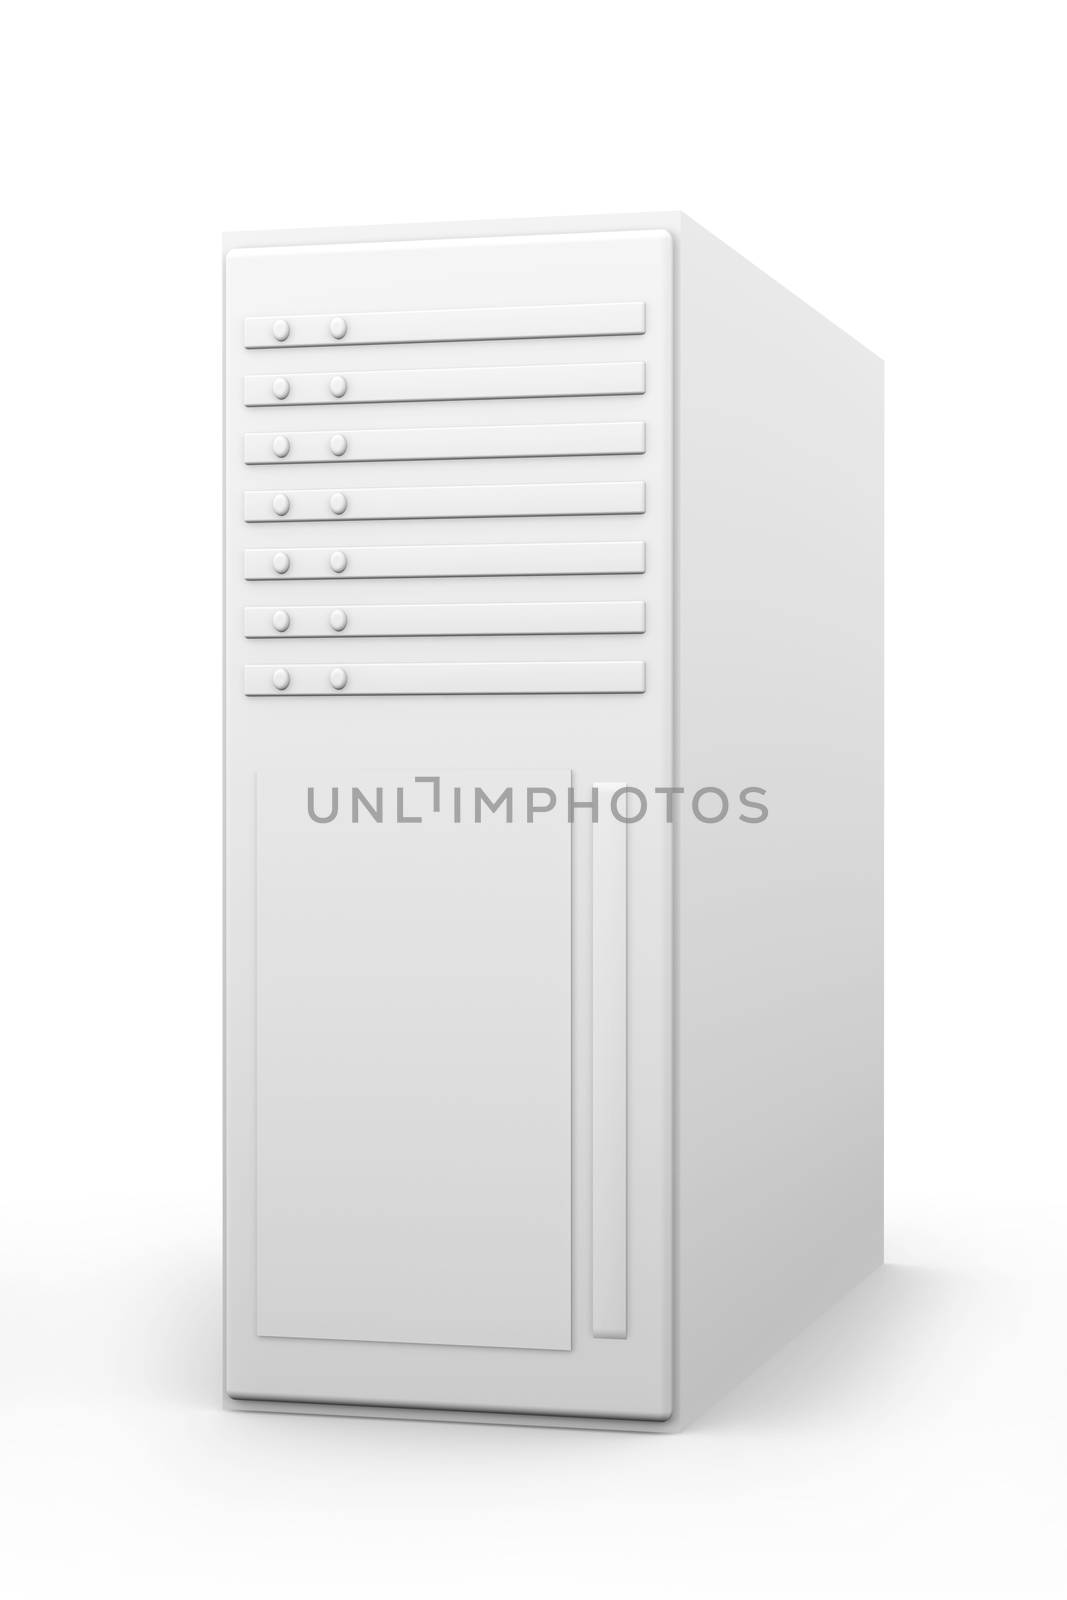 19 Inch Server Tower by Spectral